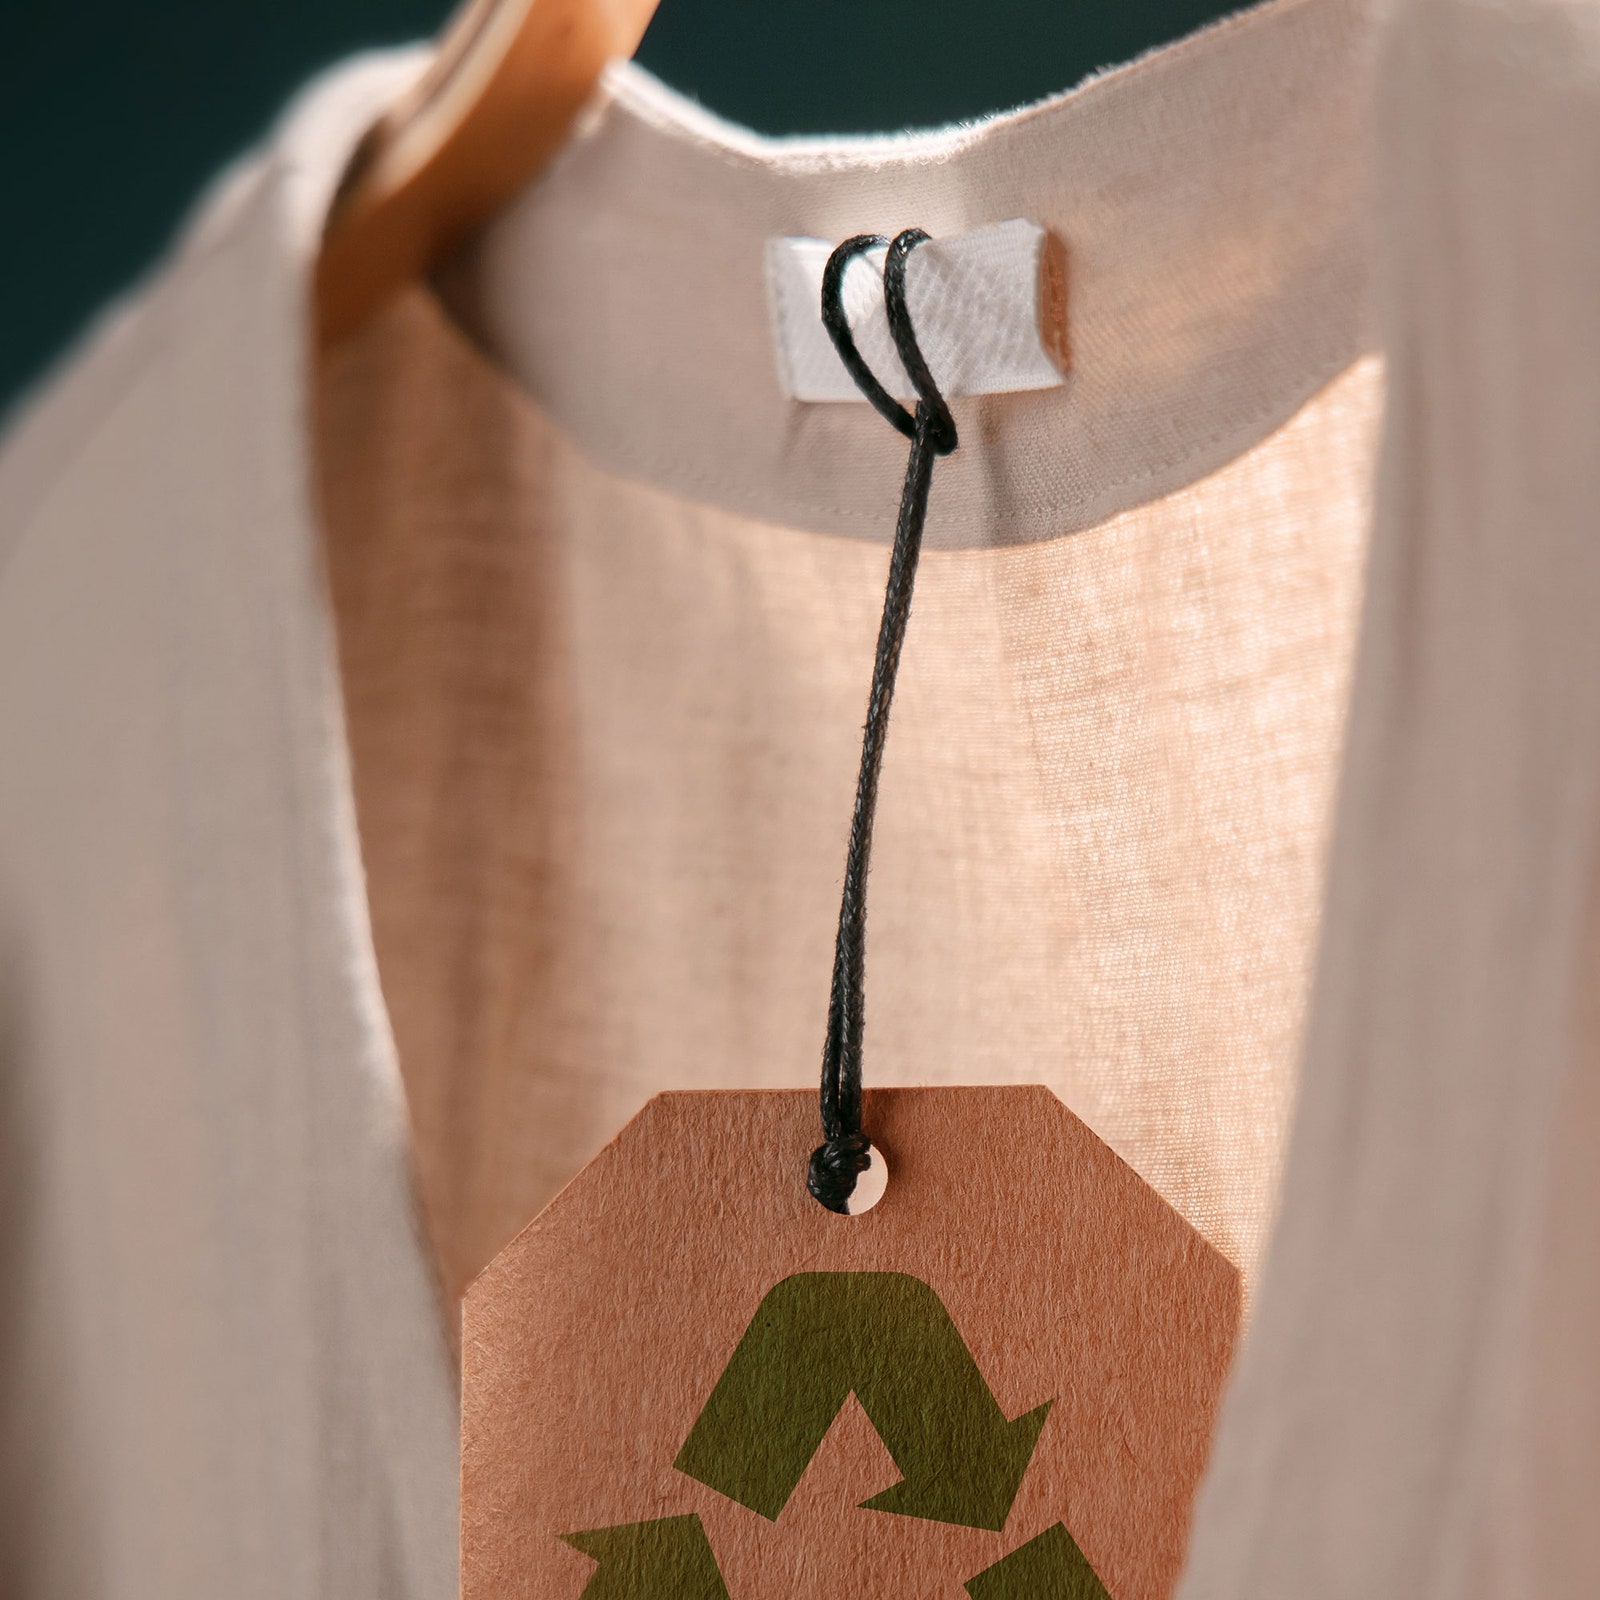 Greenhushing is on the rise. What do fashion brands need to know?